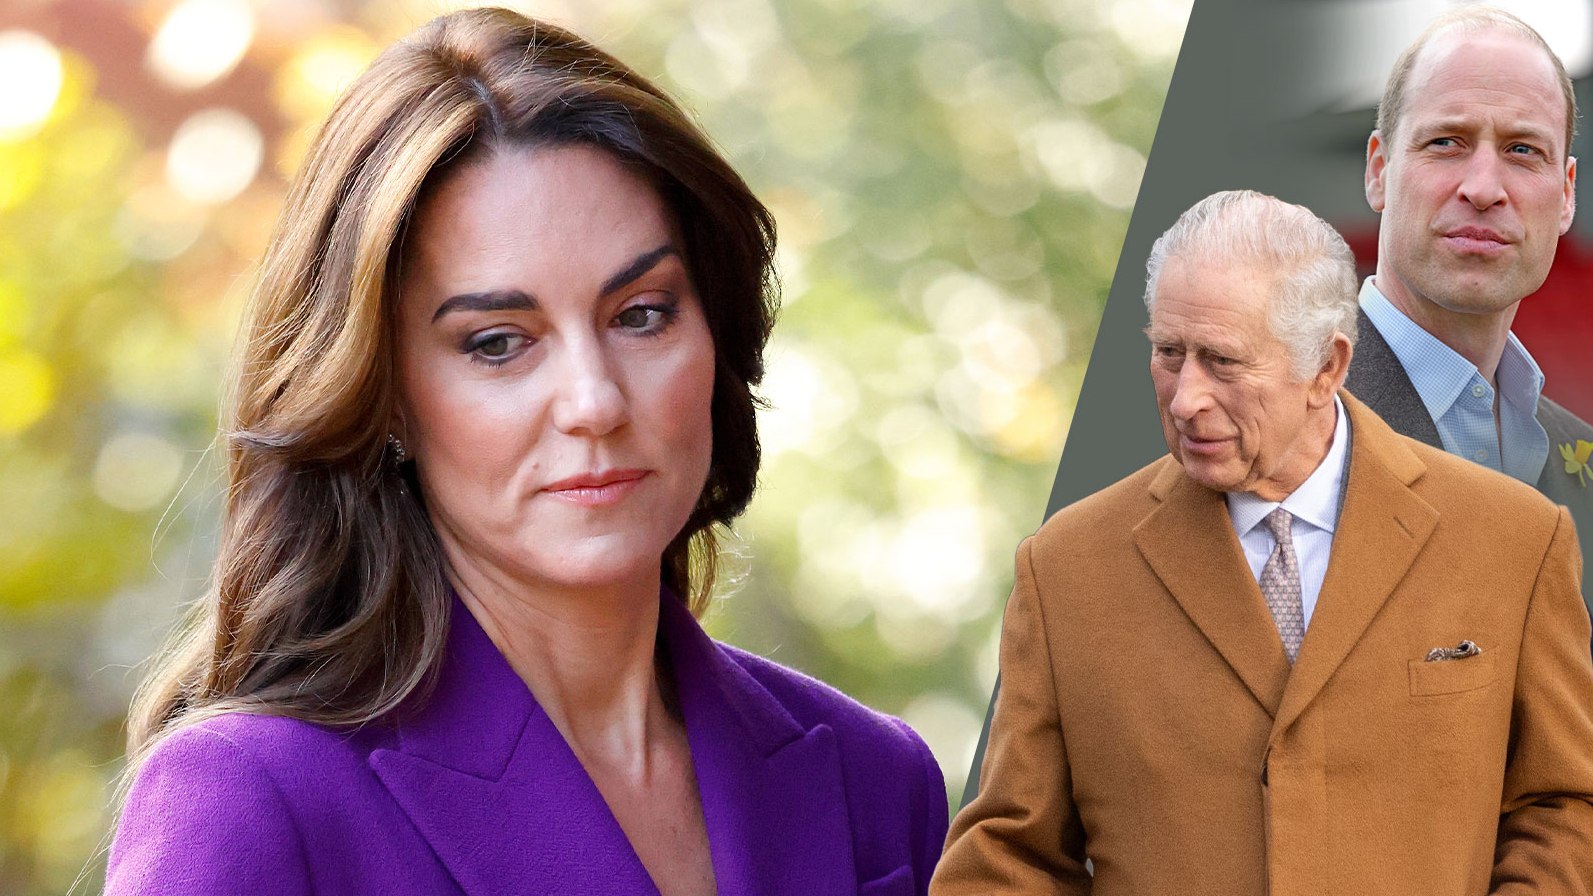 Where is Kate? The royal family attracts more speculation by the day